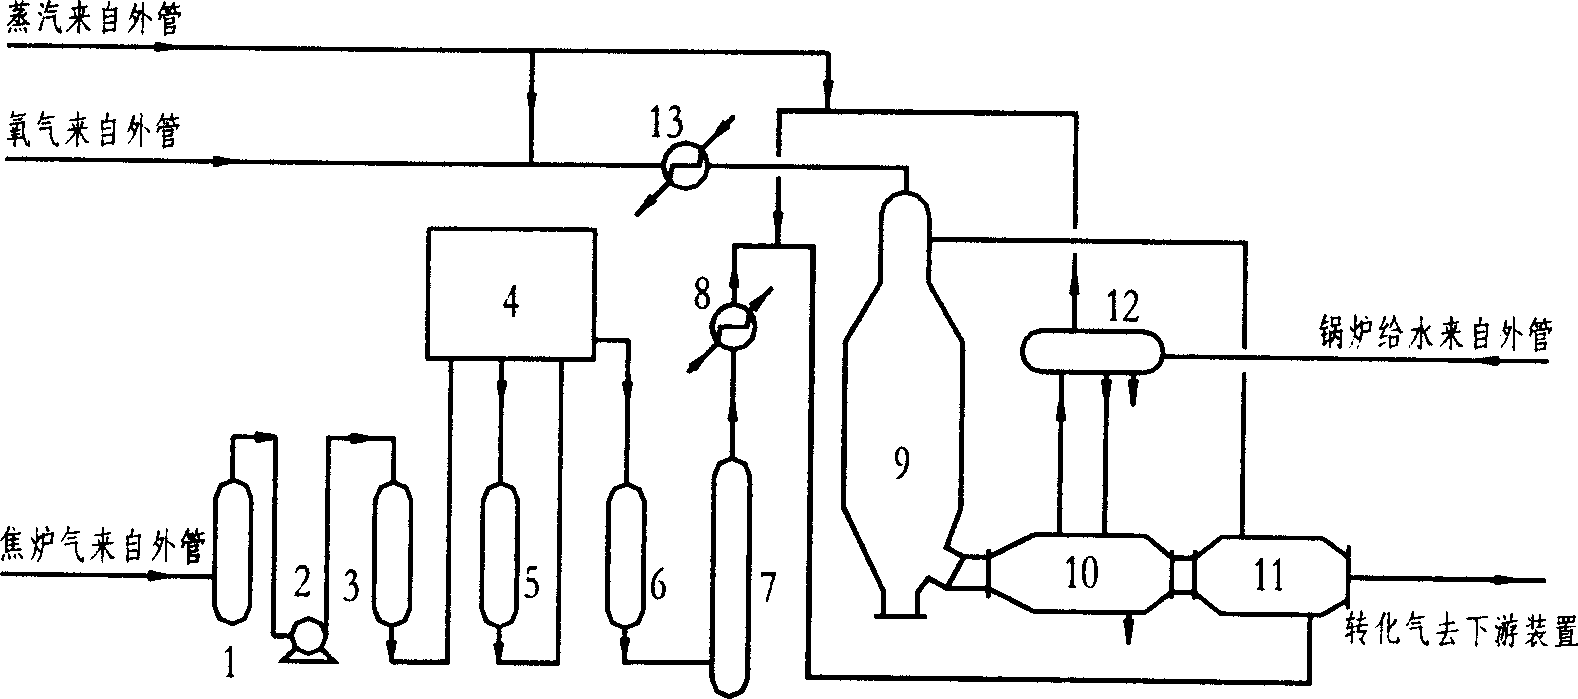 Process for pretreatment of coke oven gas and partial oxidation preparation of synthetic raw gas